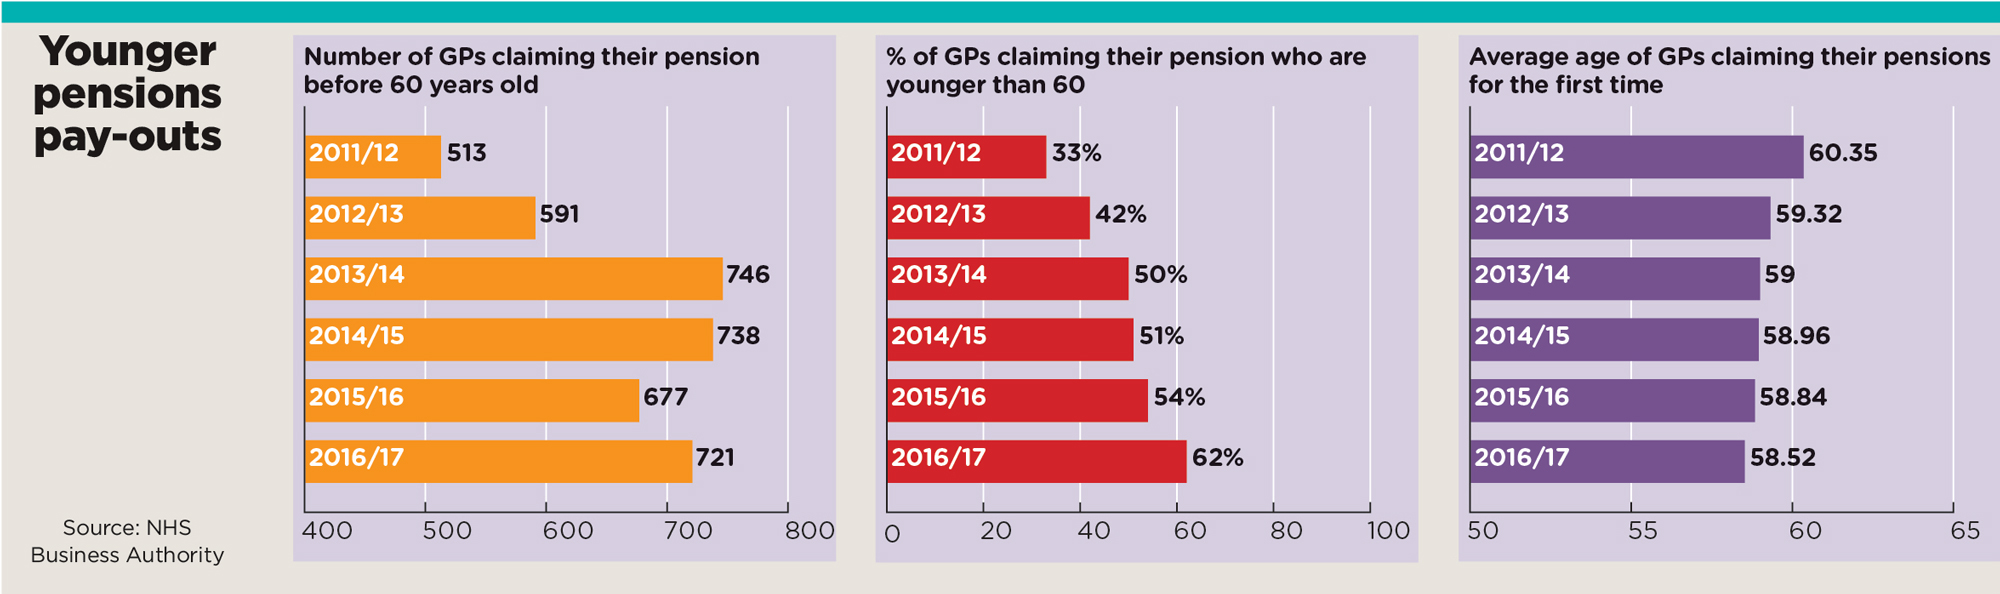 younger pensions pay outs